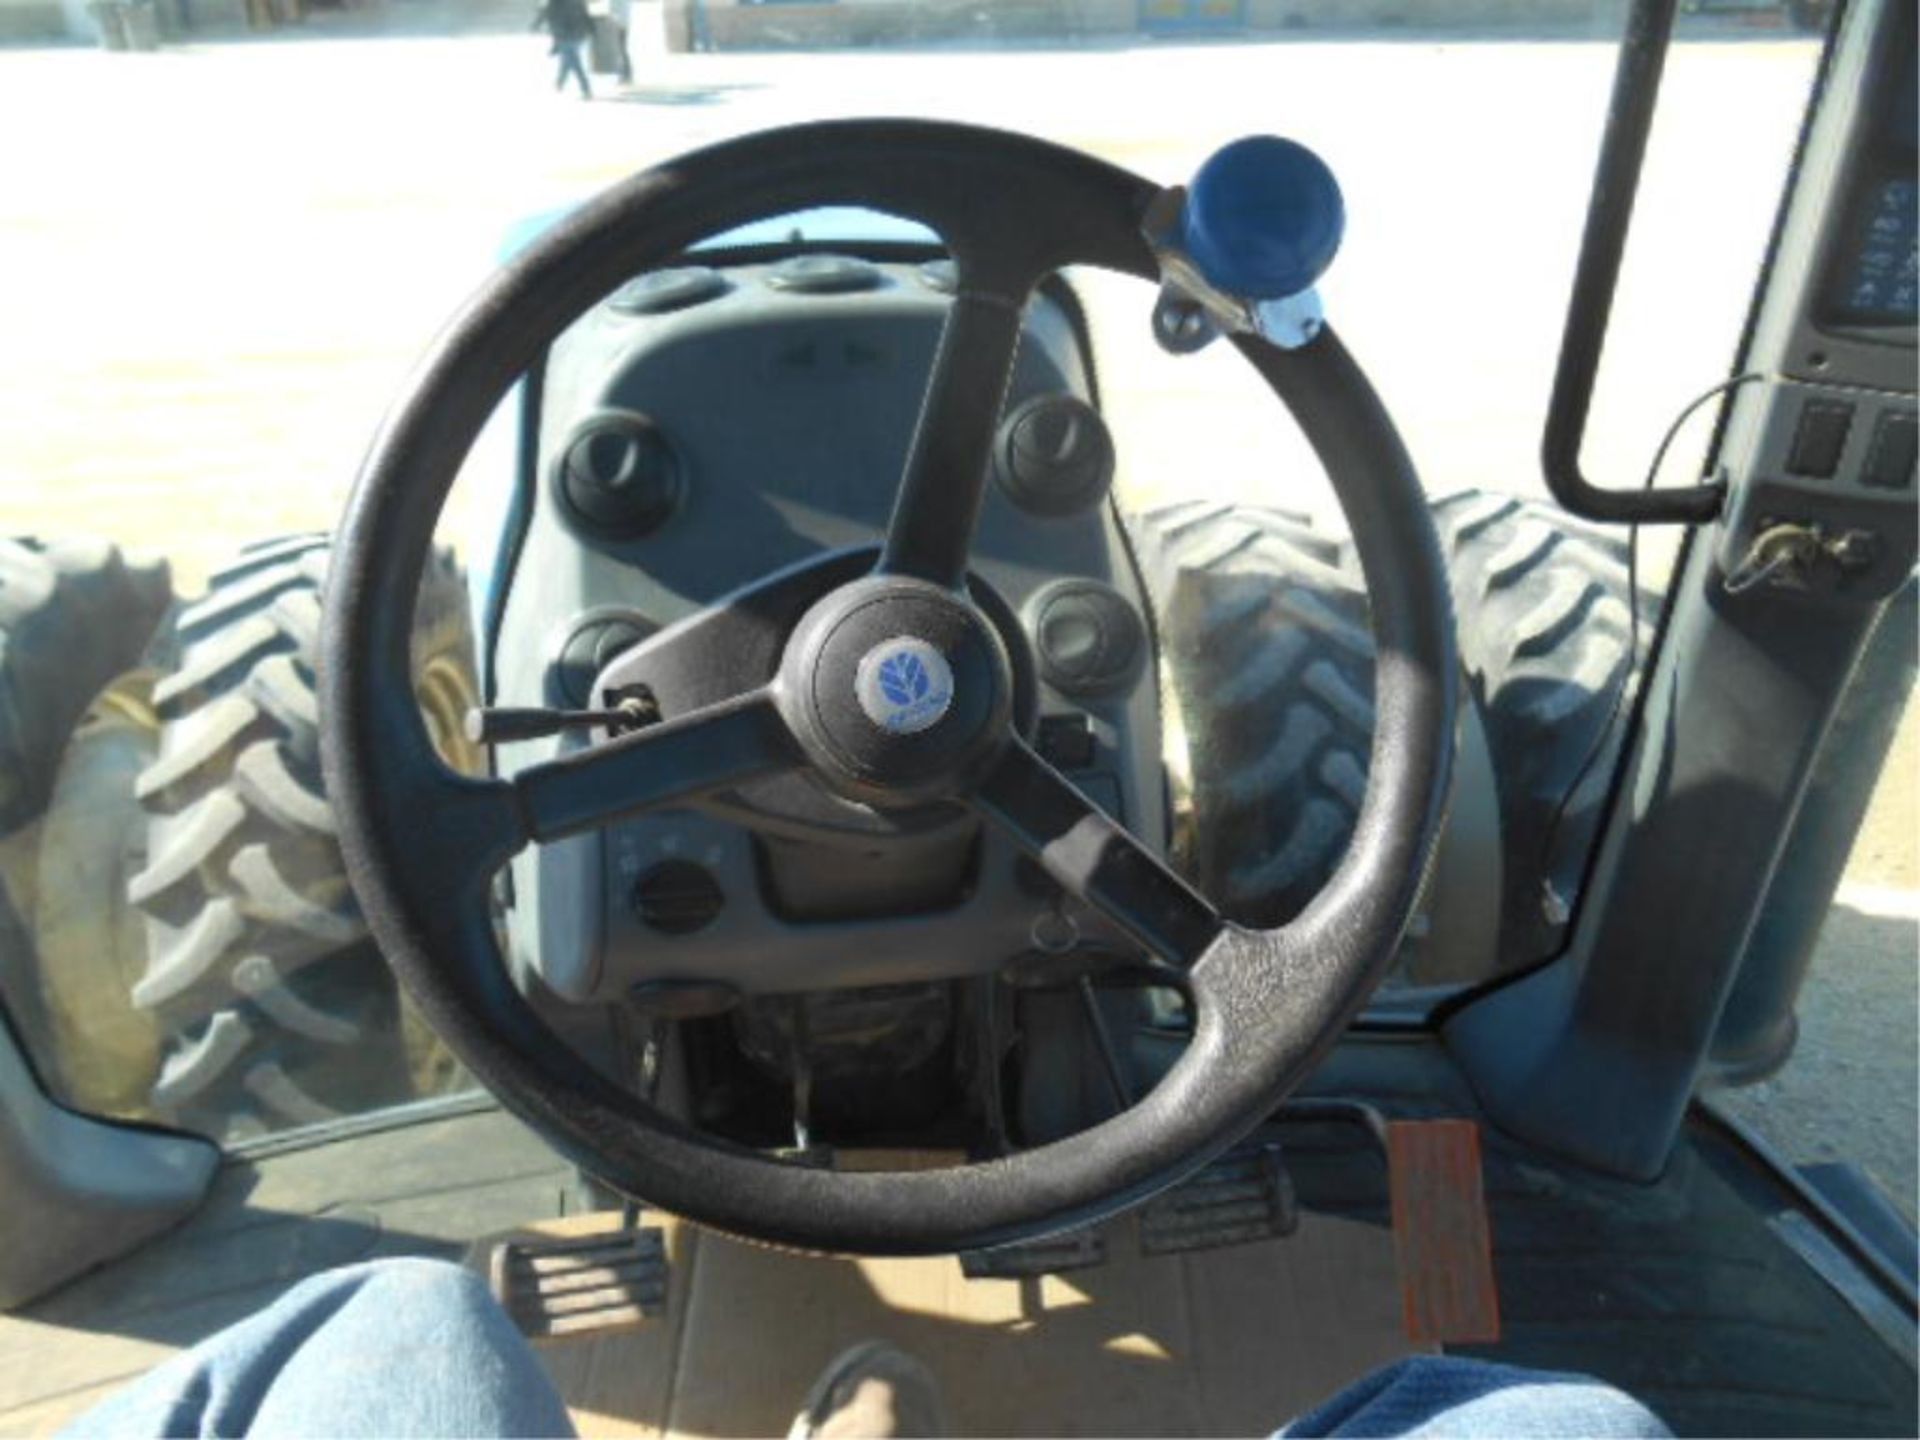 New Holland T8020 Tractor '09, sn#Z8RW02210 5630 Hrs, MFWD, Fully Equipped Cab, Buddy Seat, 278 - Image 10 of 11